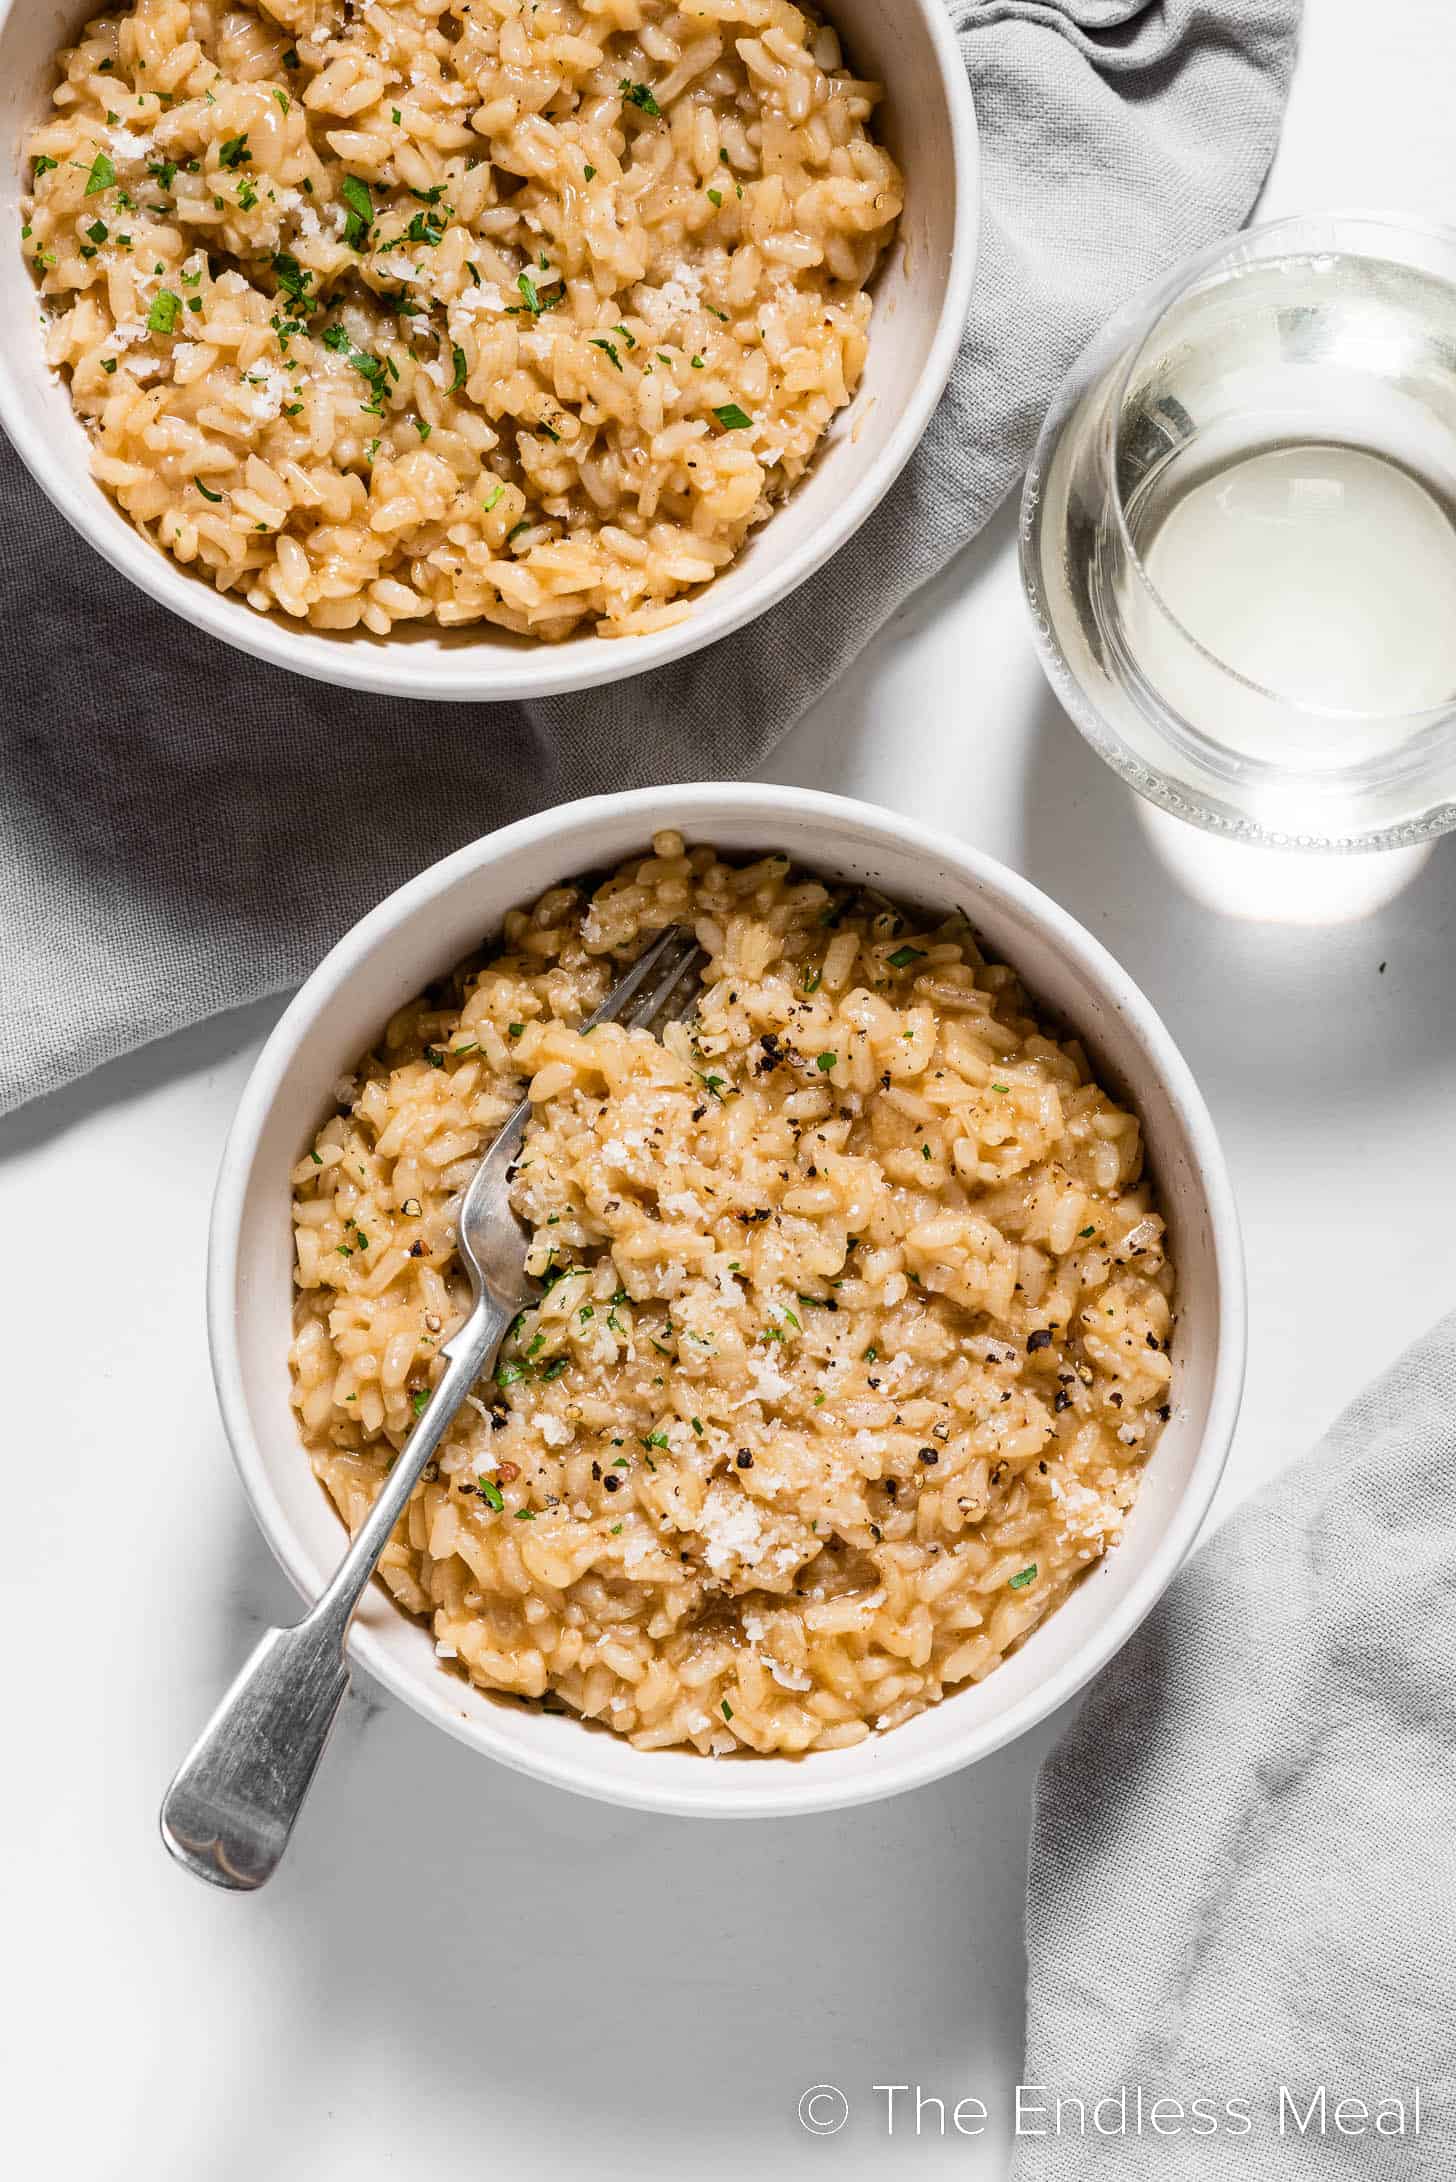 This easy risotto recipe n the table with a glass of wine